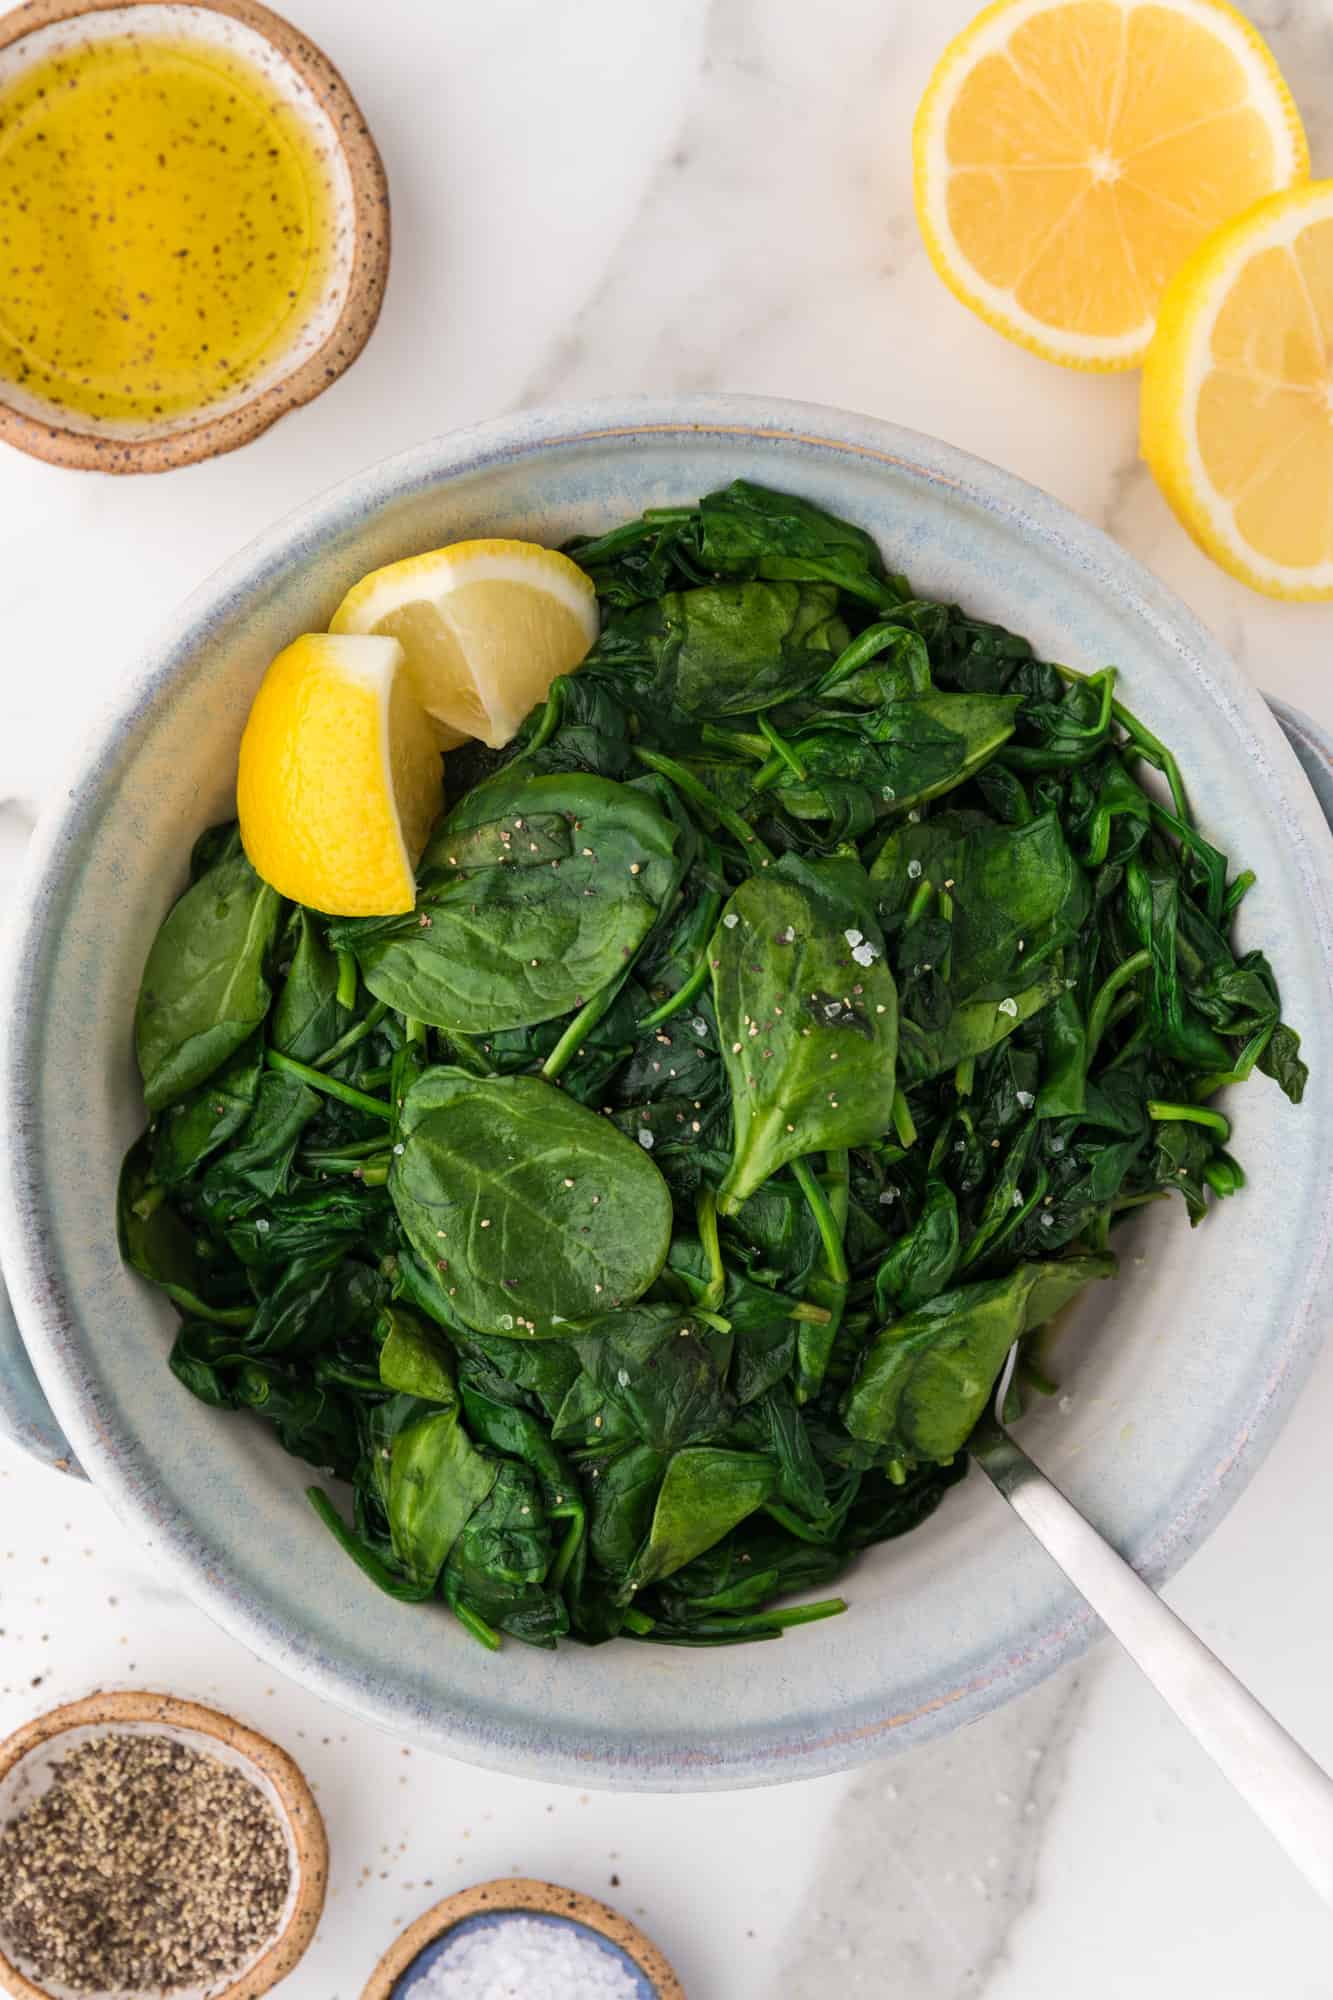 Sautéed spinach in a white bowl.